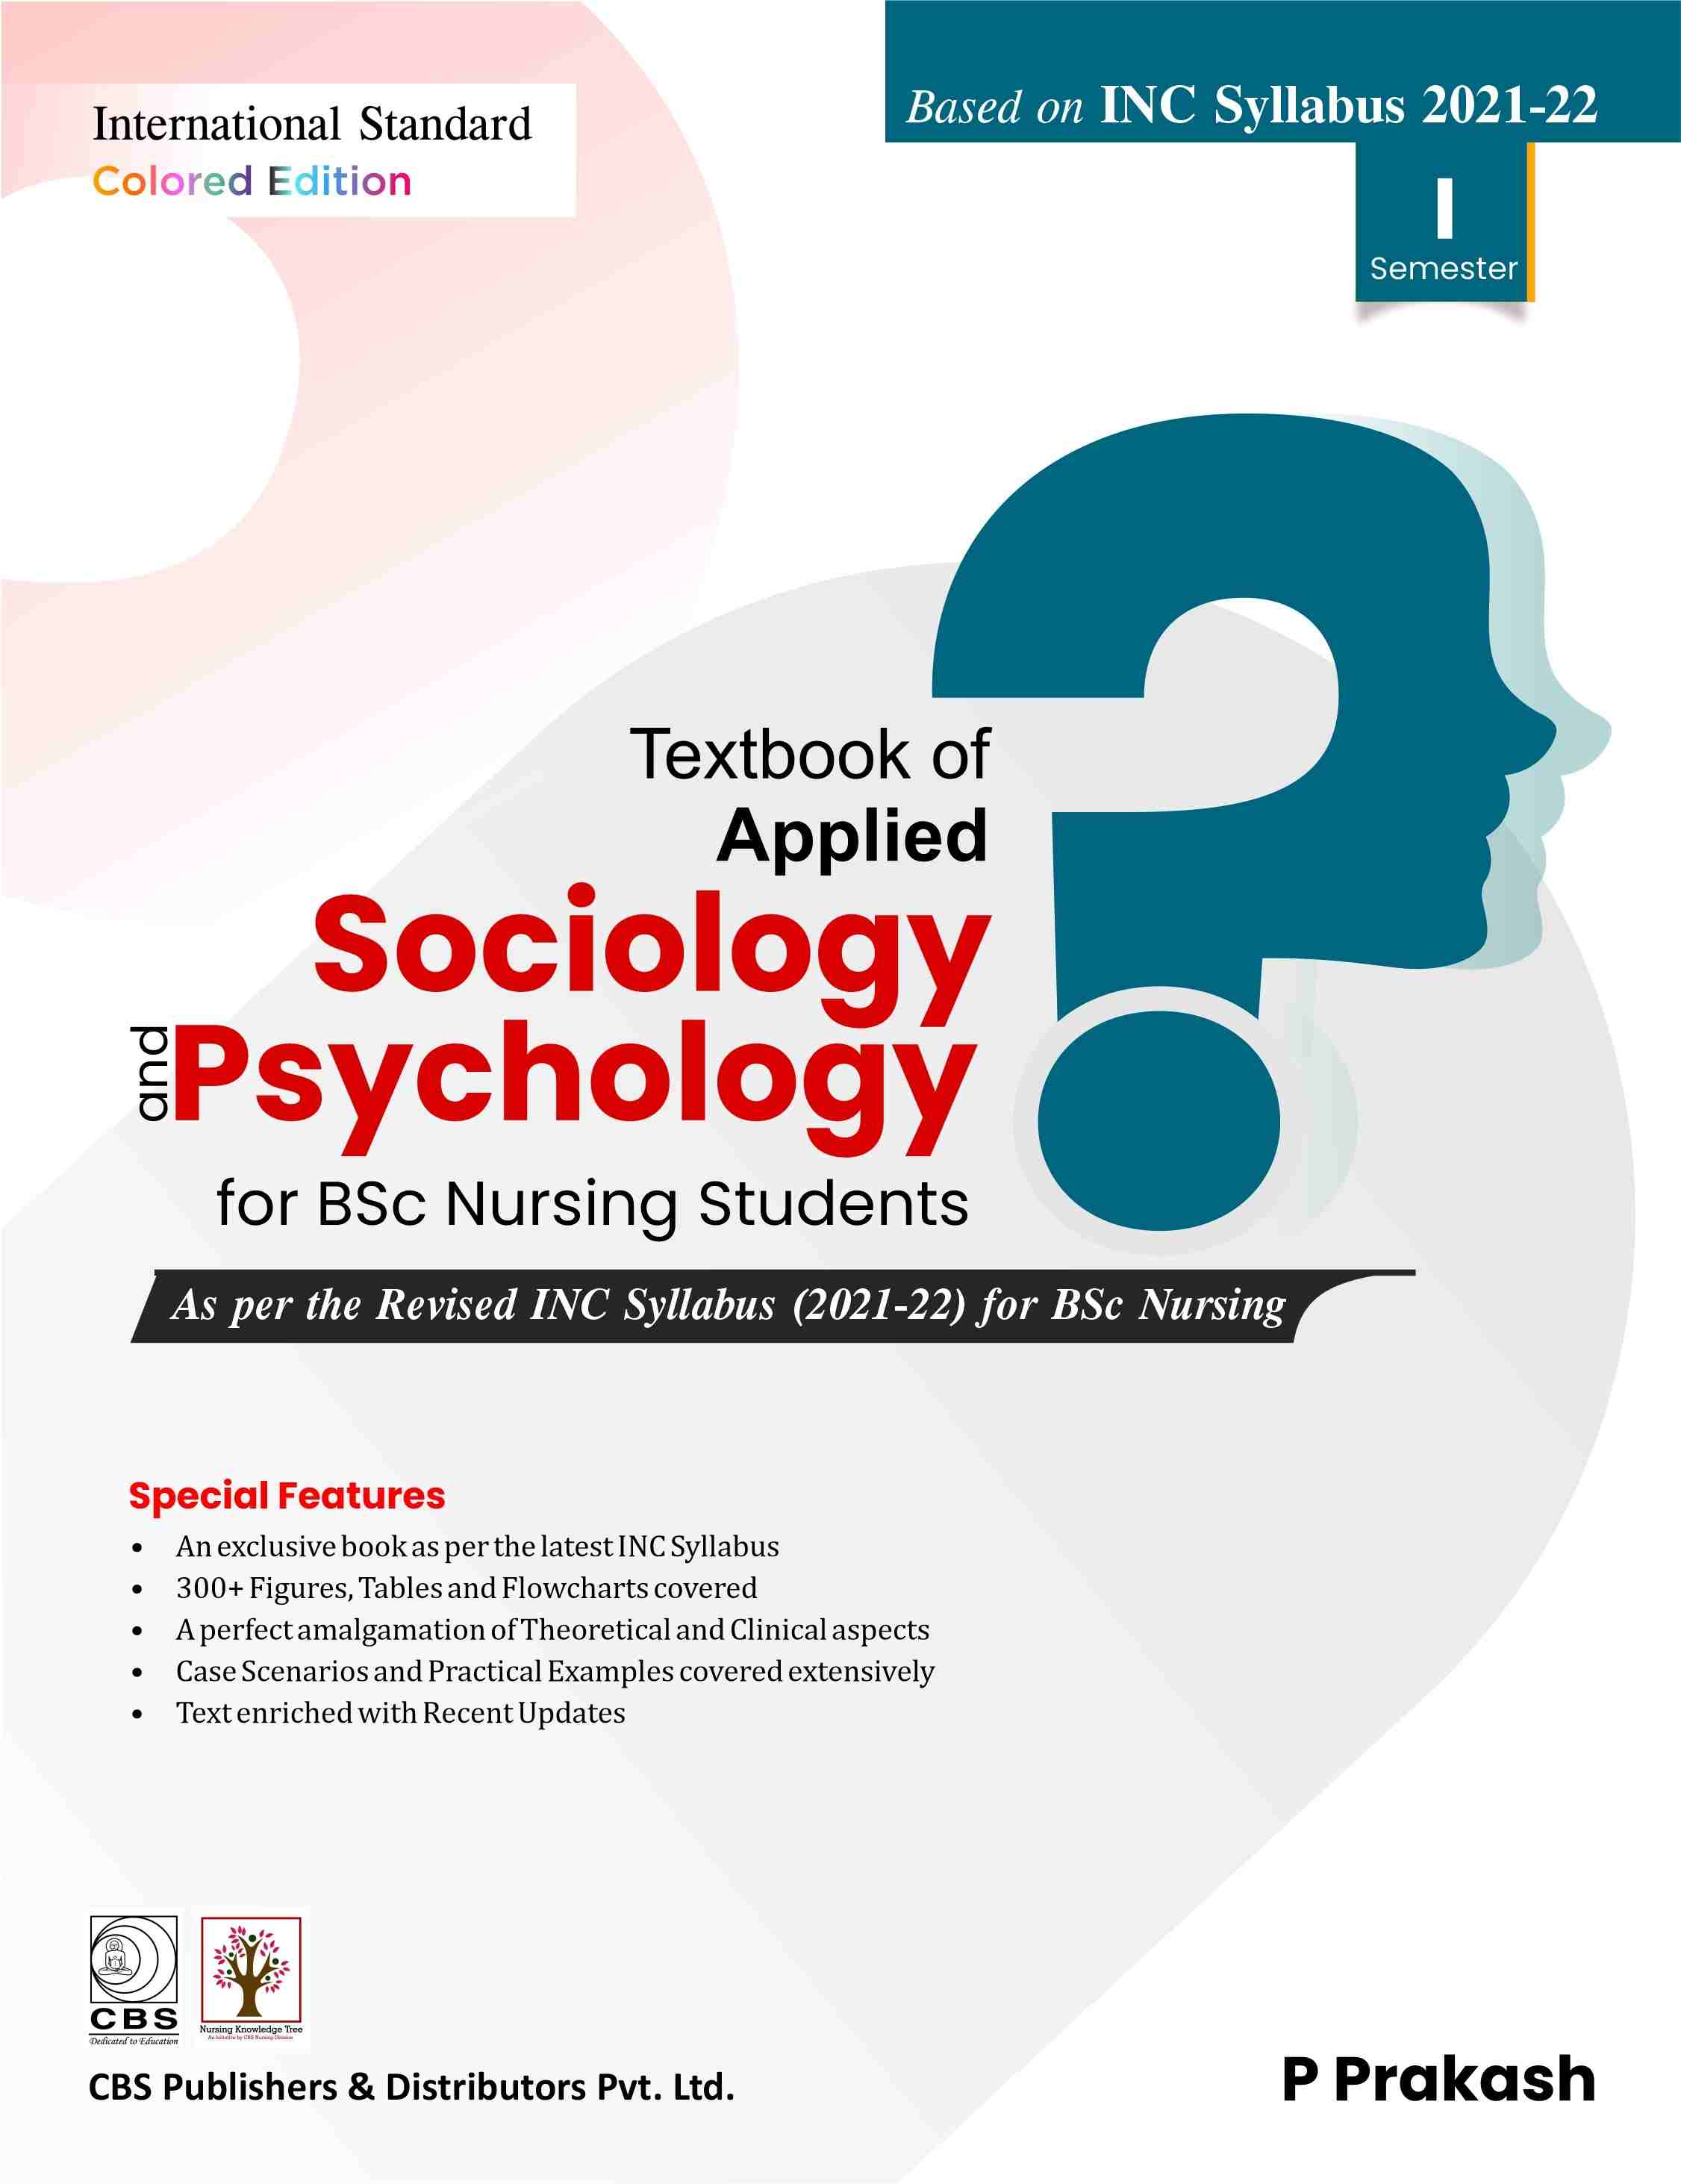 

best-sellers/cbs/textbook-of-applied-sociology-and-psychology-for-bsc-nursing-students-based-on-inc-syllabus-2021-2022-semester-i-pb-2022--9789390619542